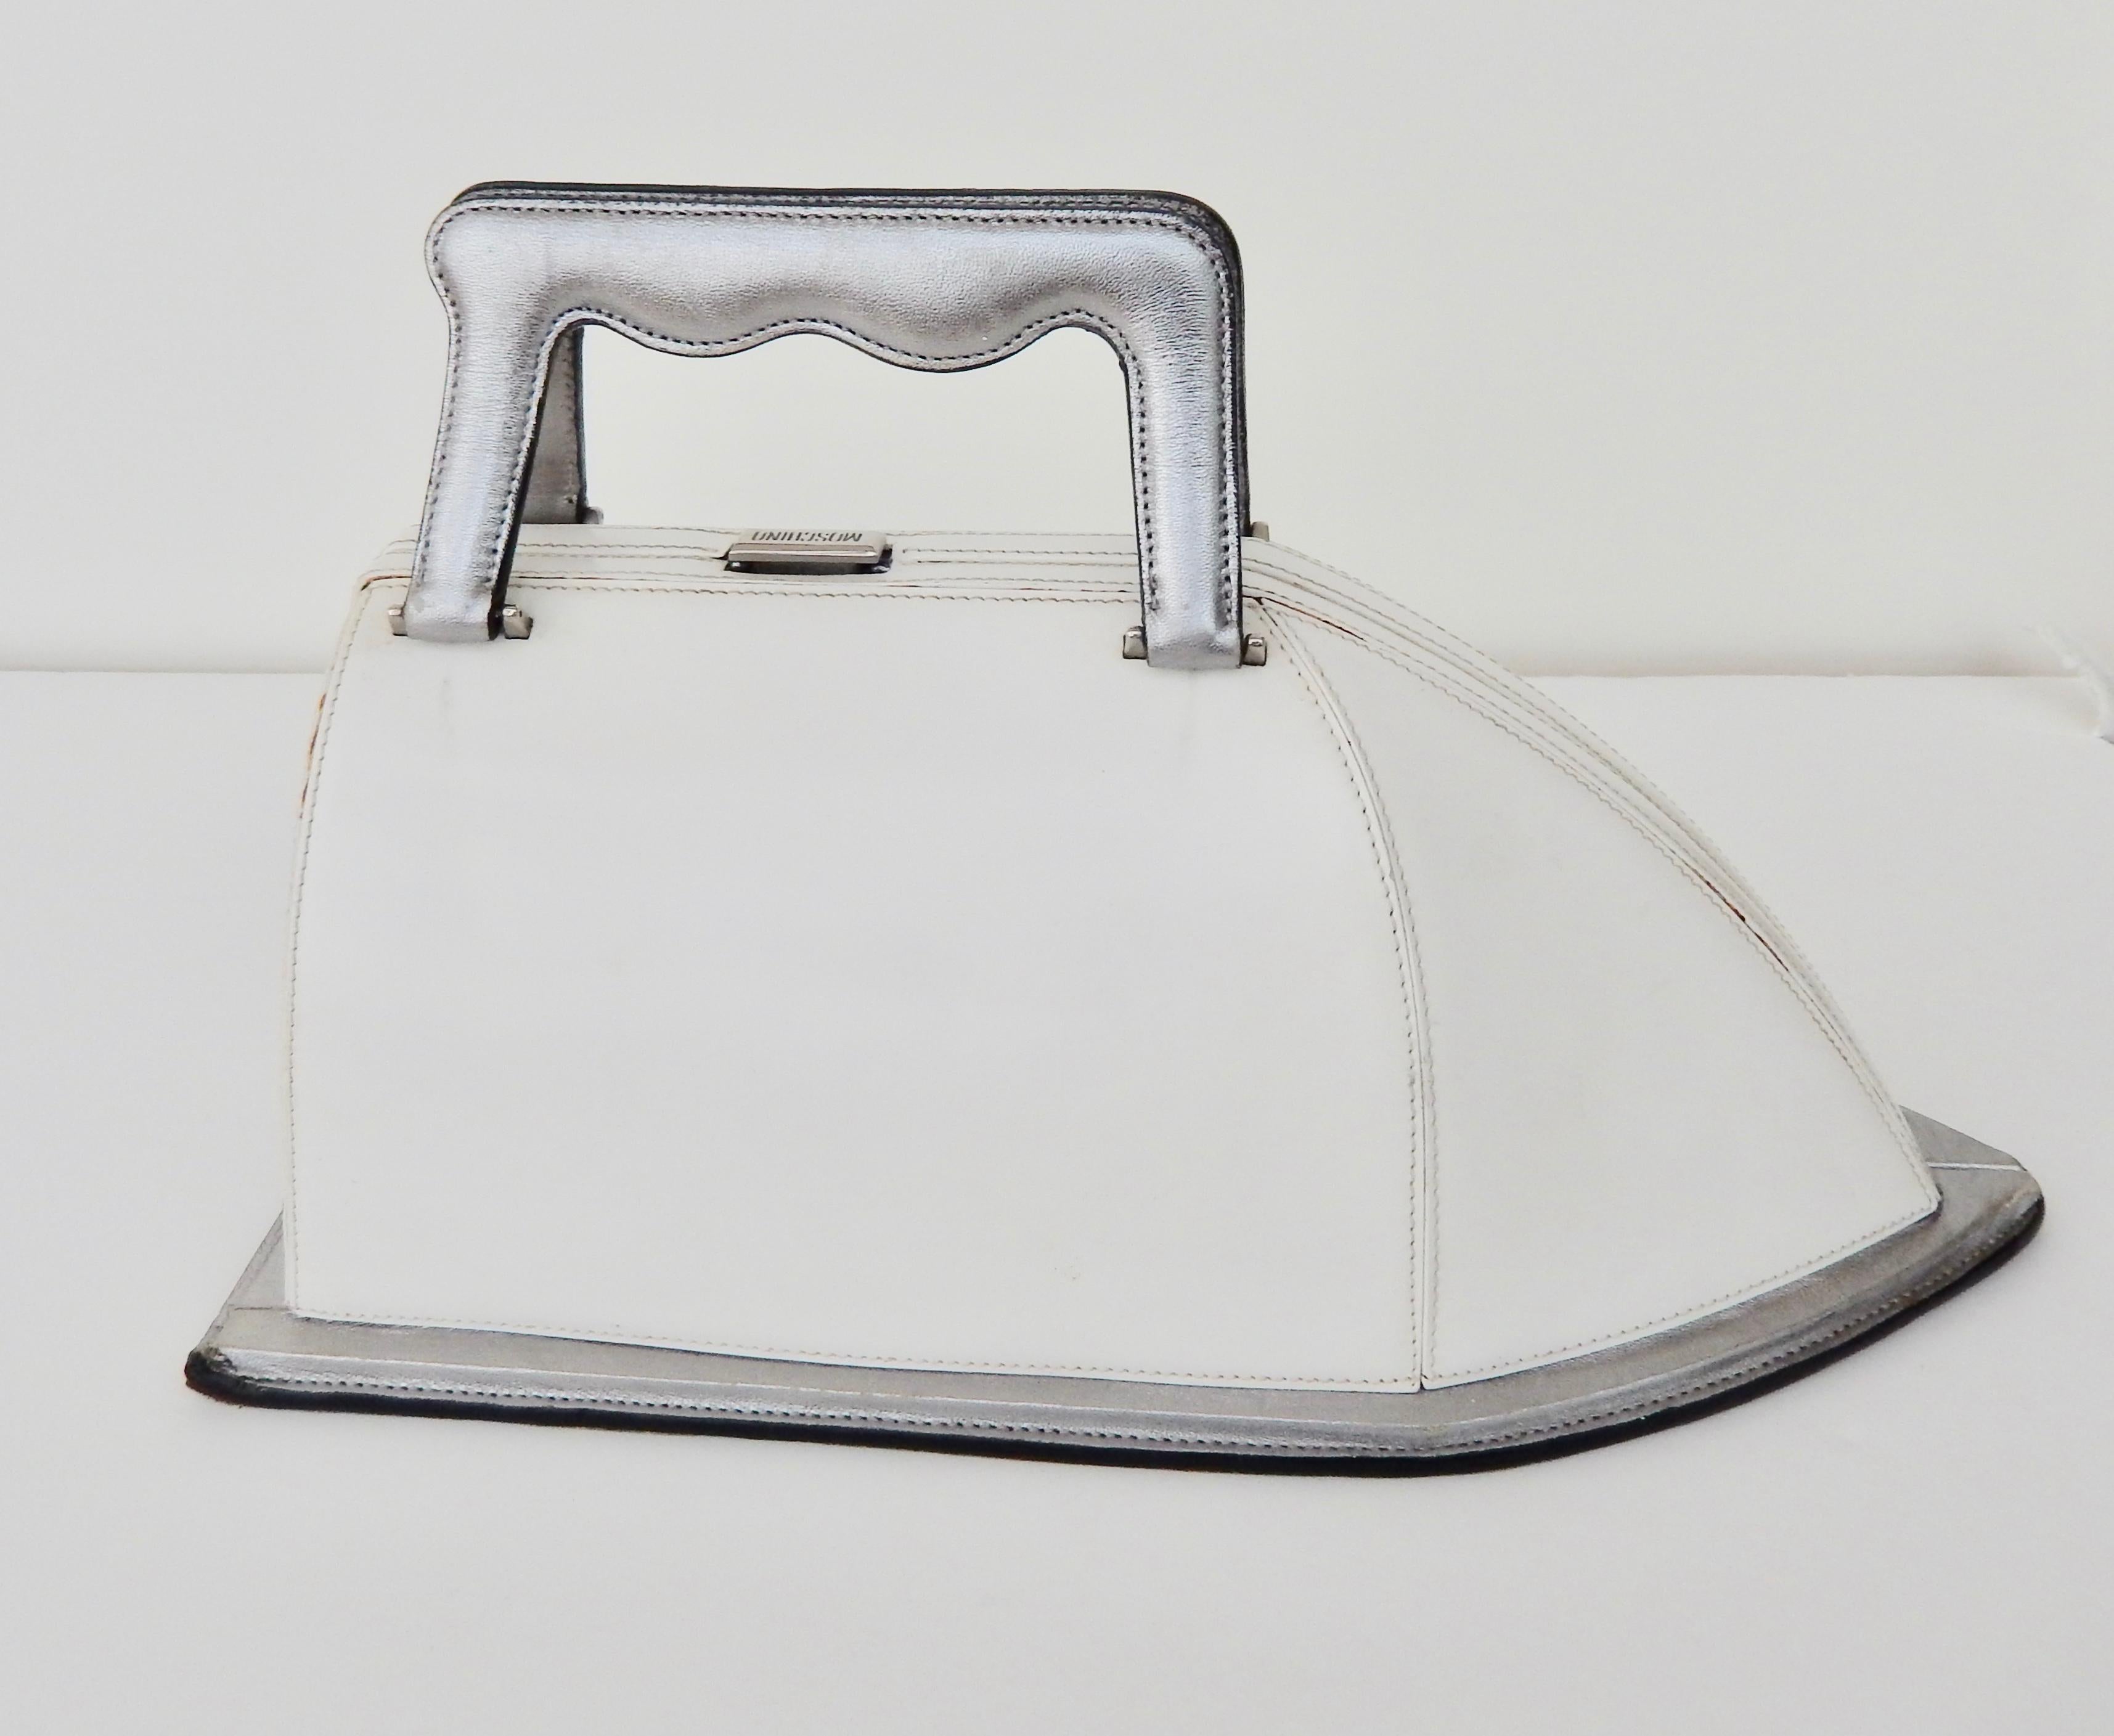 A rare handbag by Moschino in the shape of an iron (